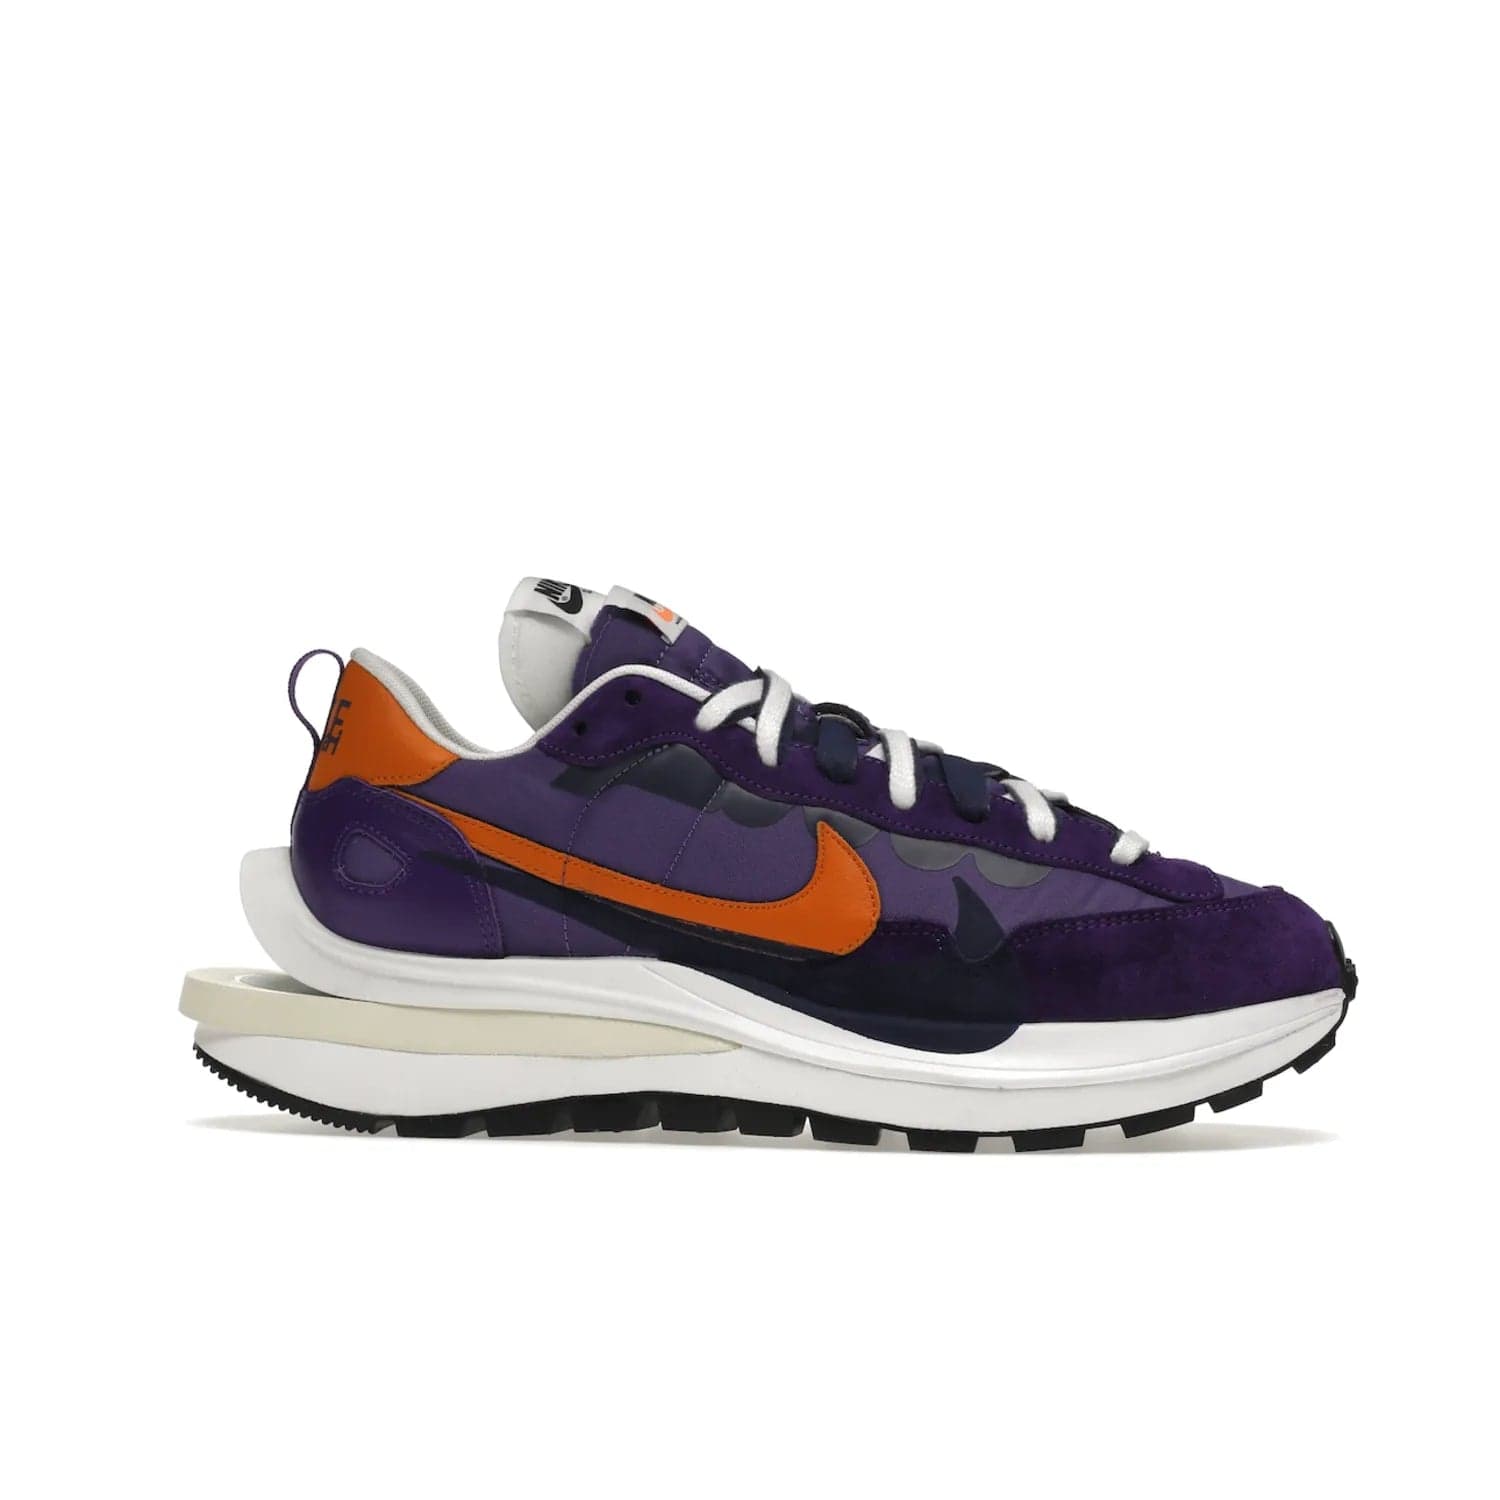 Nike Vaporwaffle sacai Dark Iris - Image 2 - Only at www.BallersClubKickz.com - Unique Nike Vaporwaffle sacai Dark Iris collab. Suede, leather & textile upper with Orange accents. Dual tongues & midsoles. Woven labels & heel tabs branding. Colorway of Purple, Orange, White & Black. Must-have for any wardrobe.